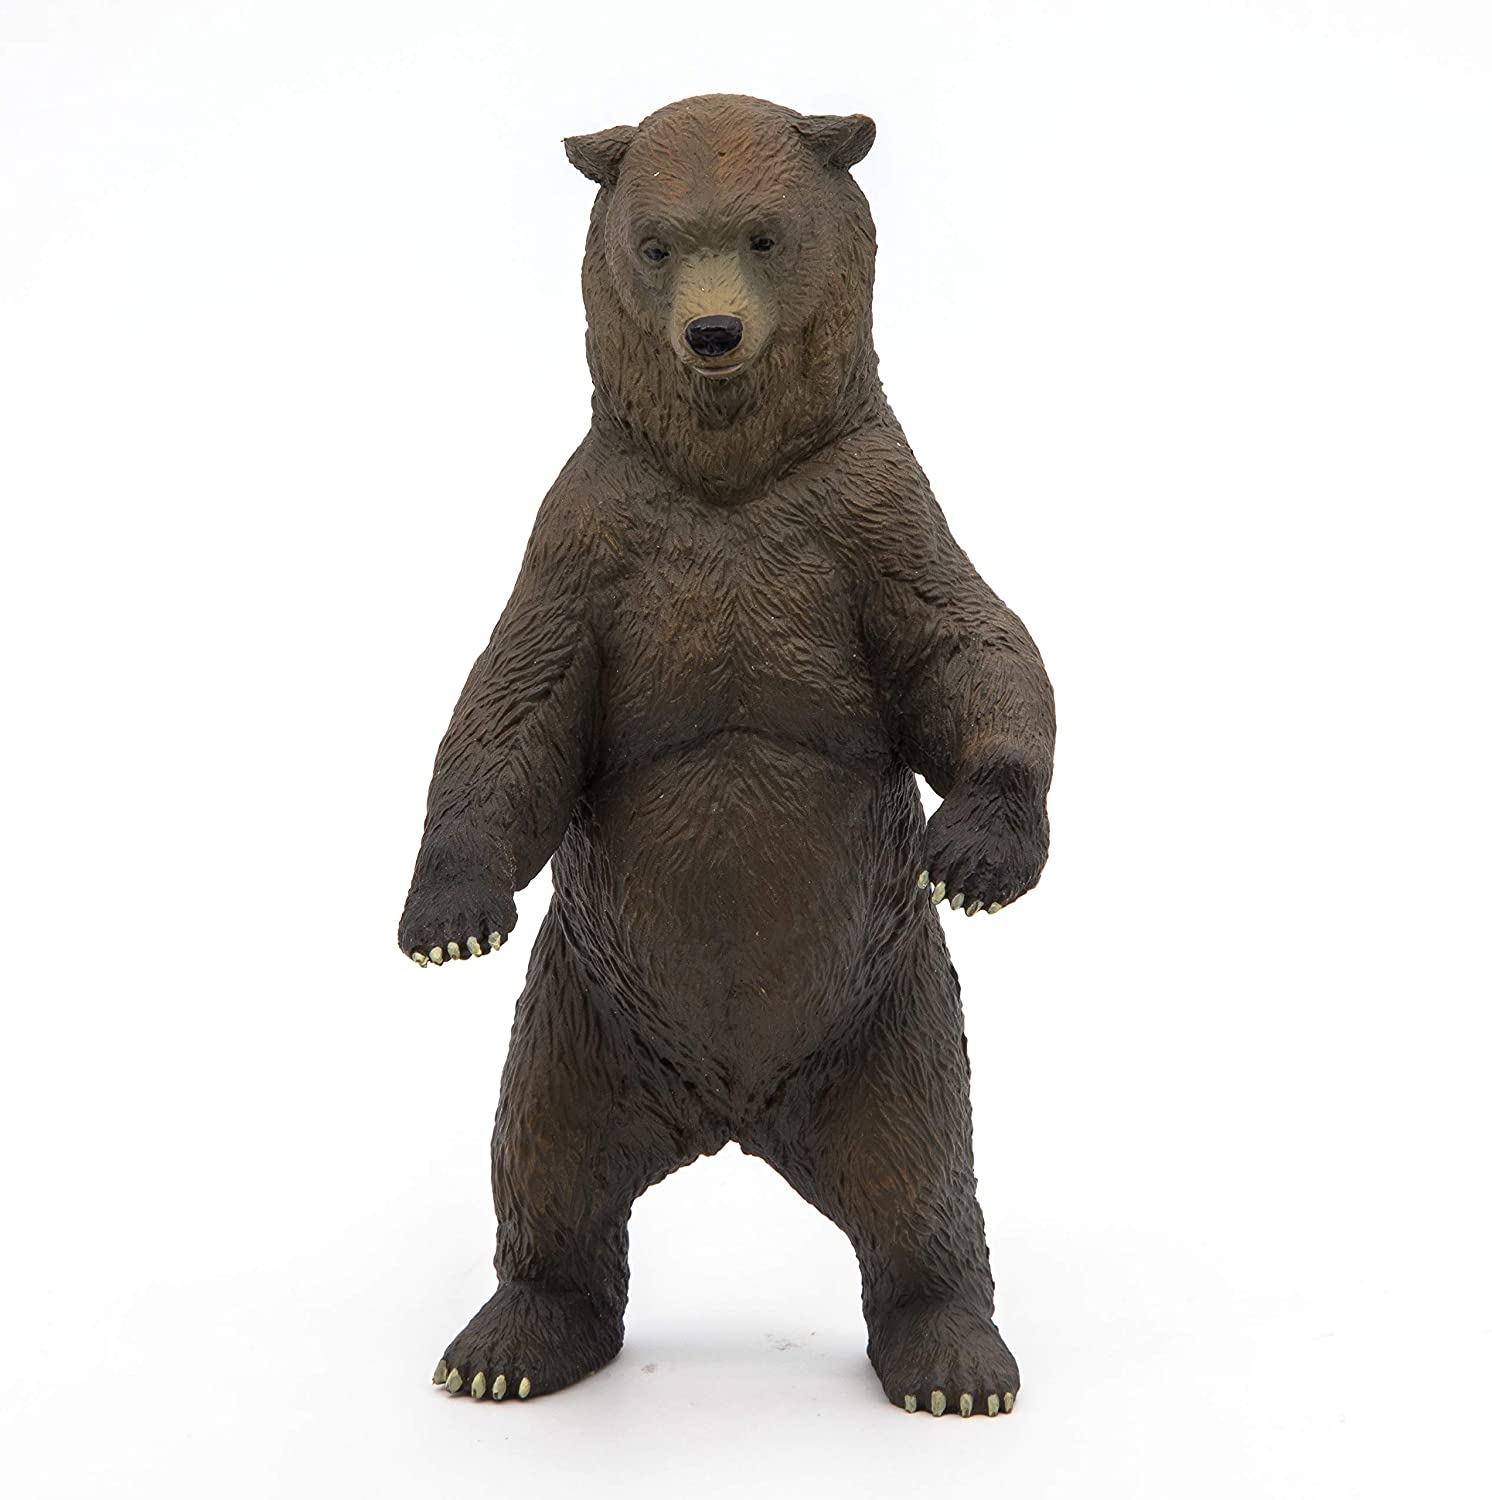 Papo 50153 Wild Animals Of The World Grizzly Bear, Multicolour